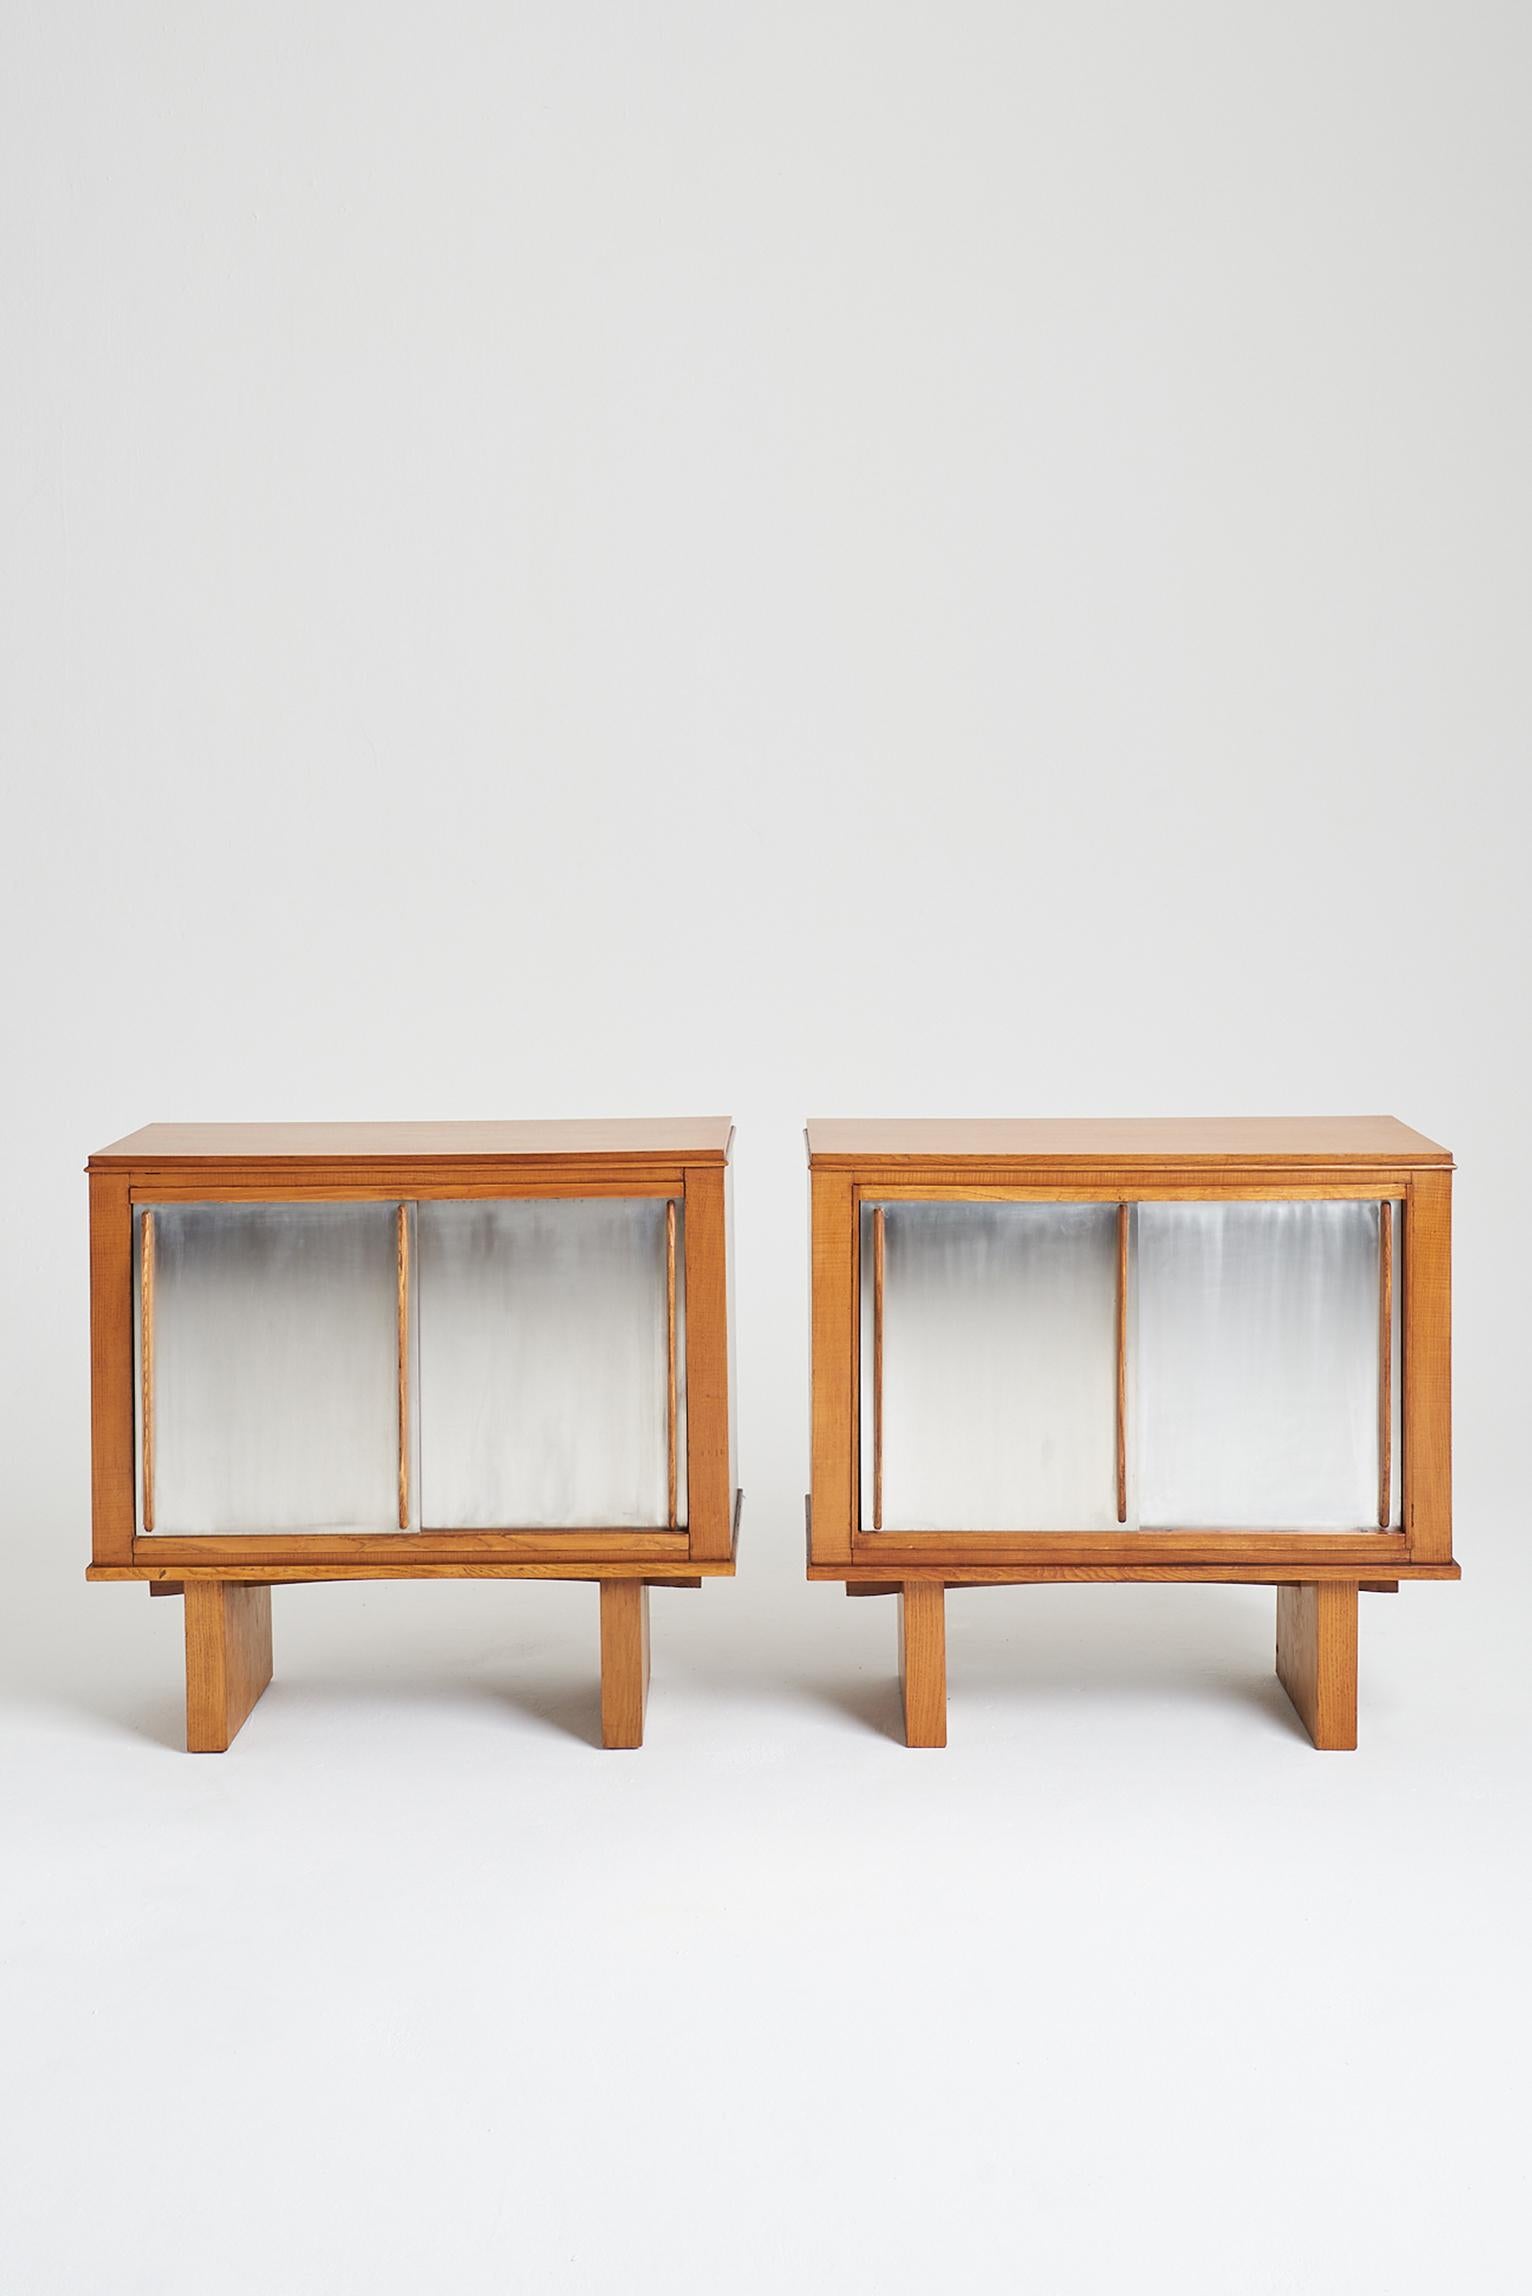 French Pair of Oak and Aluminium Cabinets, in the Manner of Charlotte Perriand